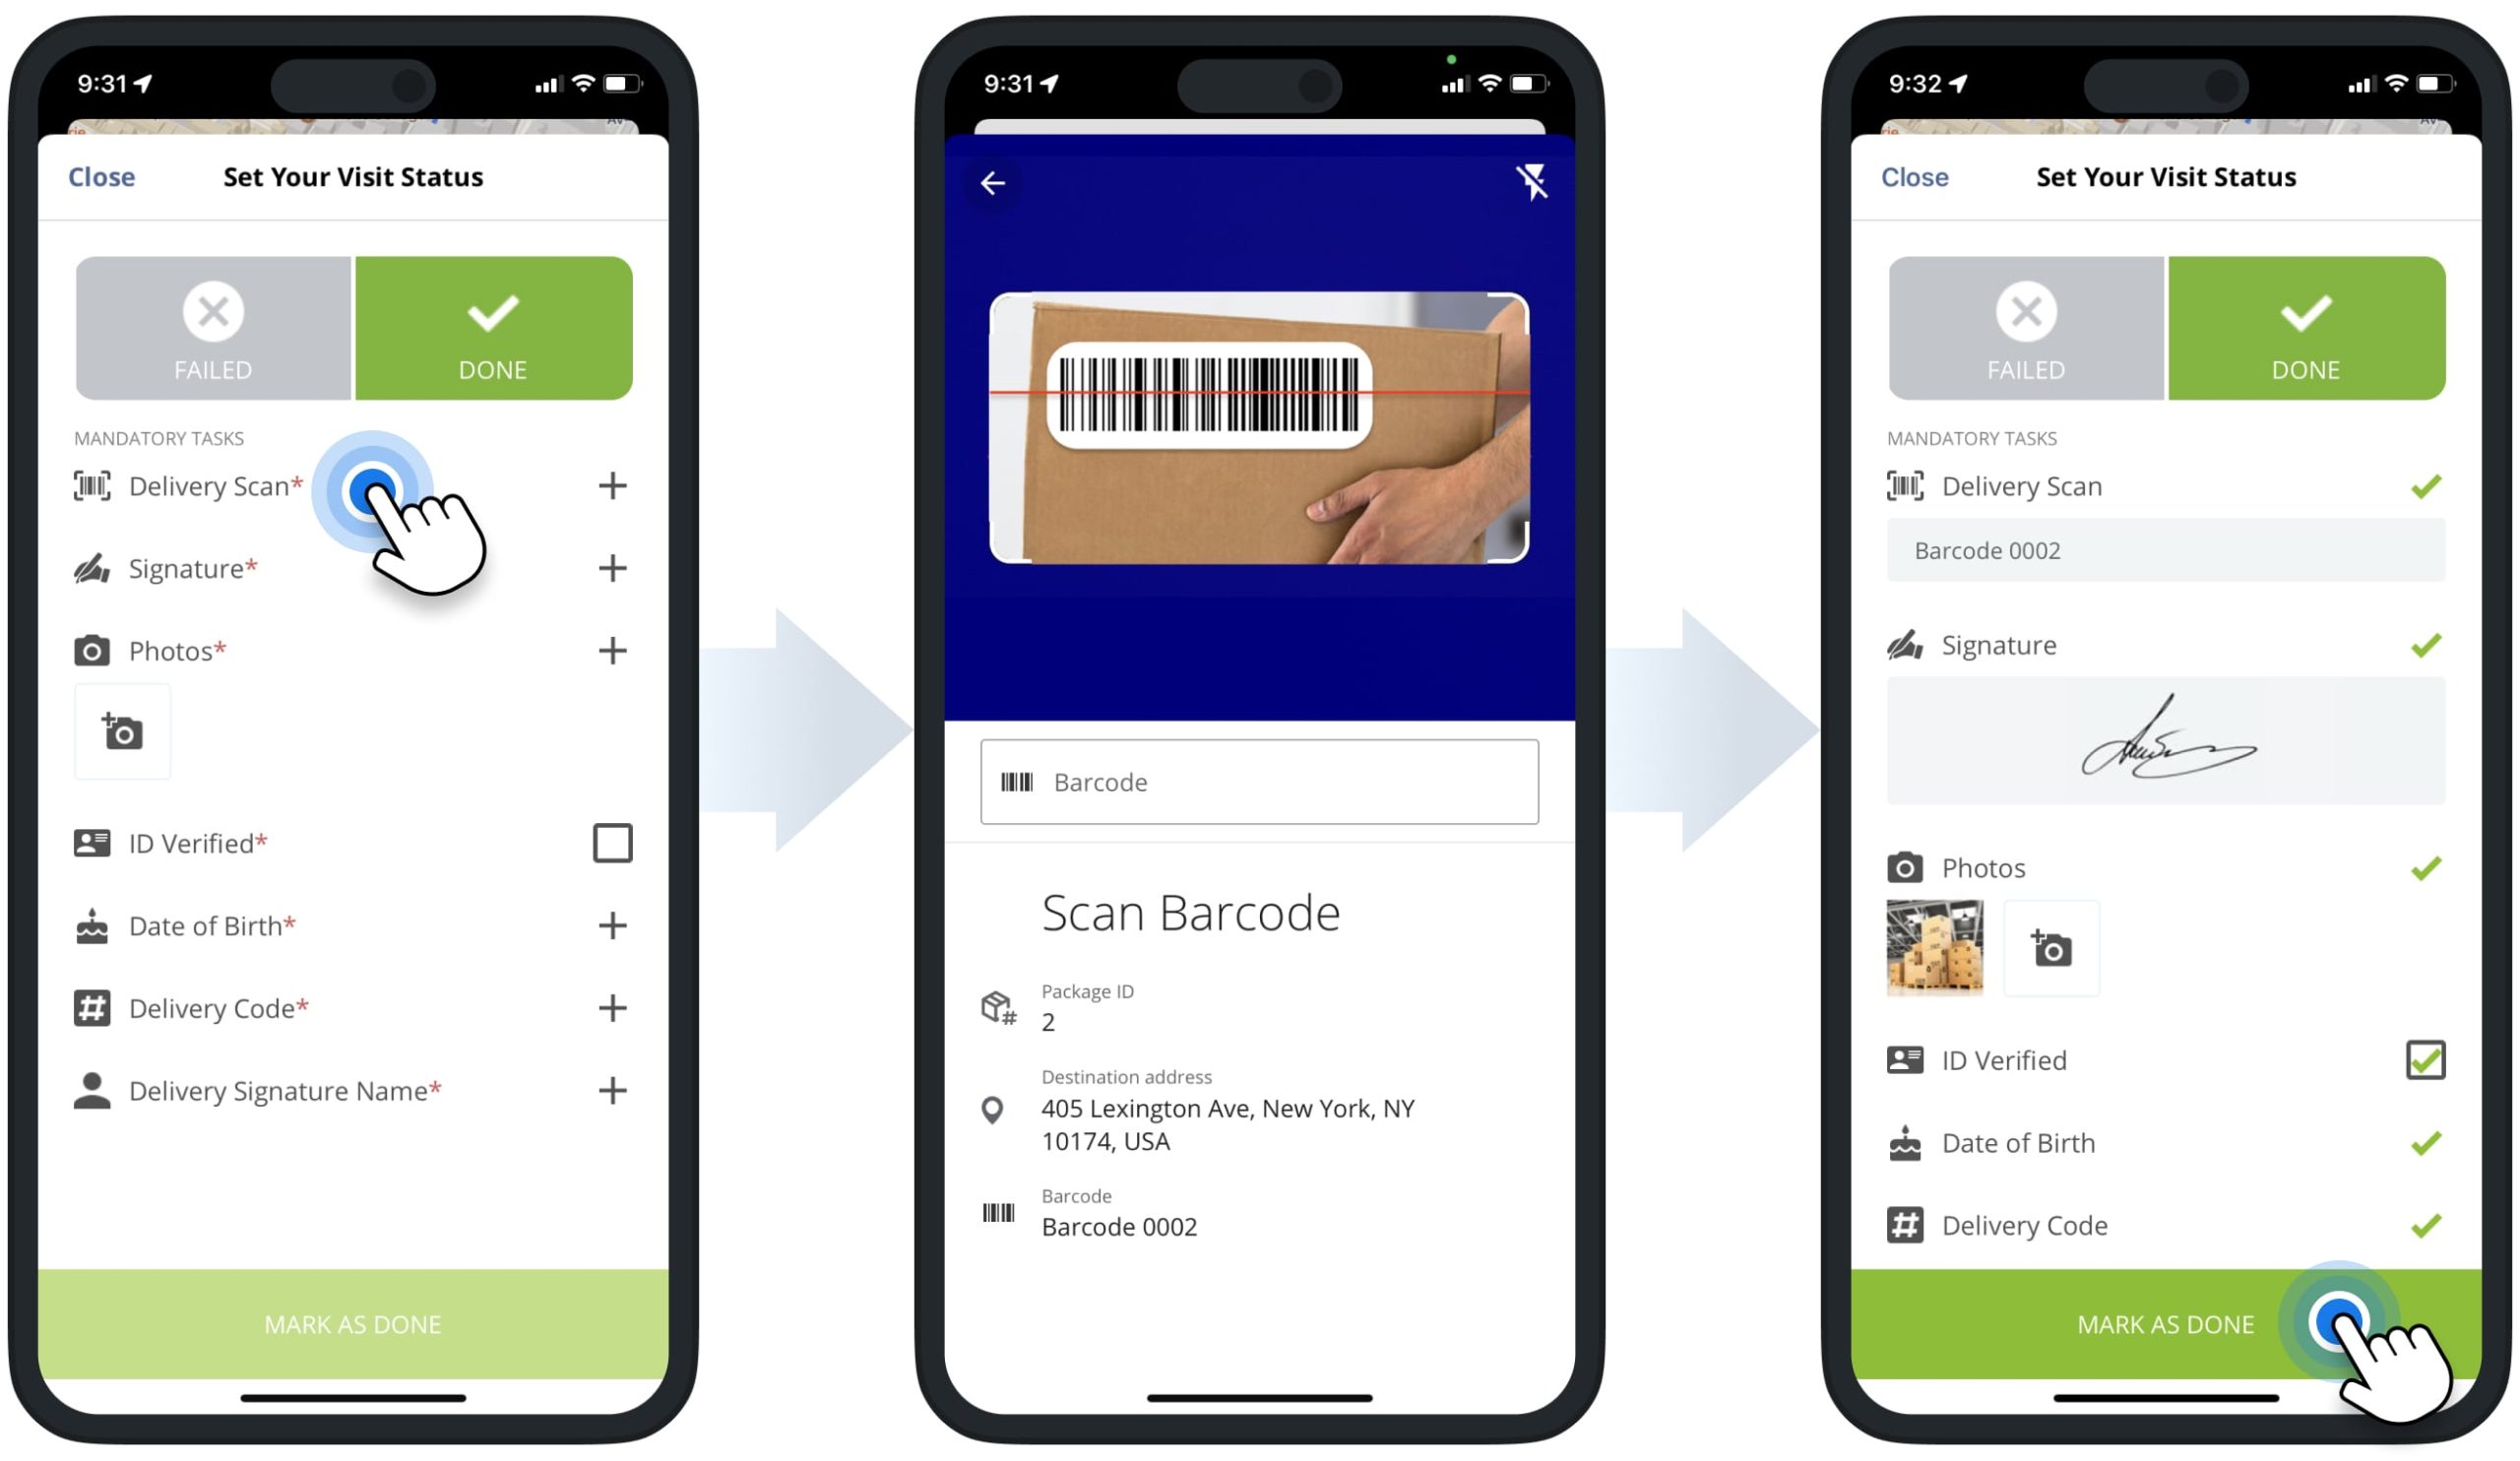 Scan Delivery Barcode using the barcode scanner to confirm unloading the order at its corresponding route stop.